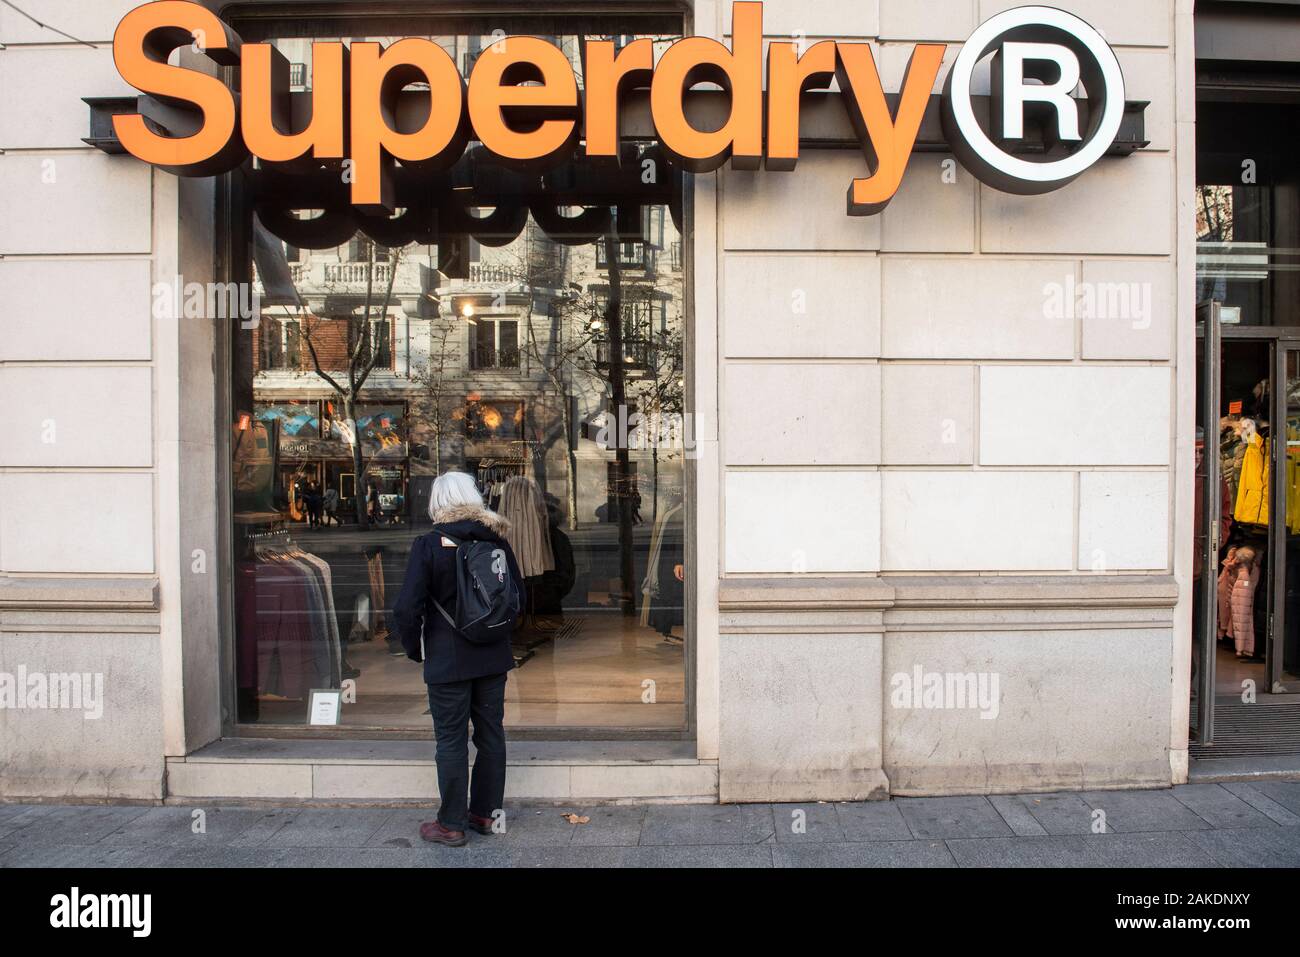 British clothing brand Superdry store seen in Spain Stock Photo - Alamy